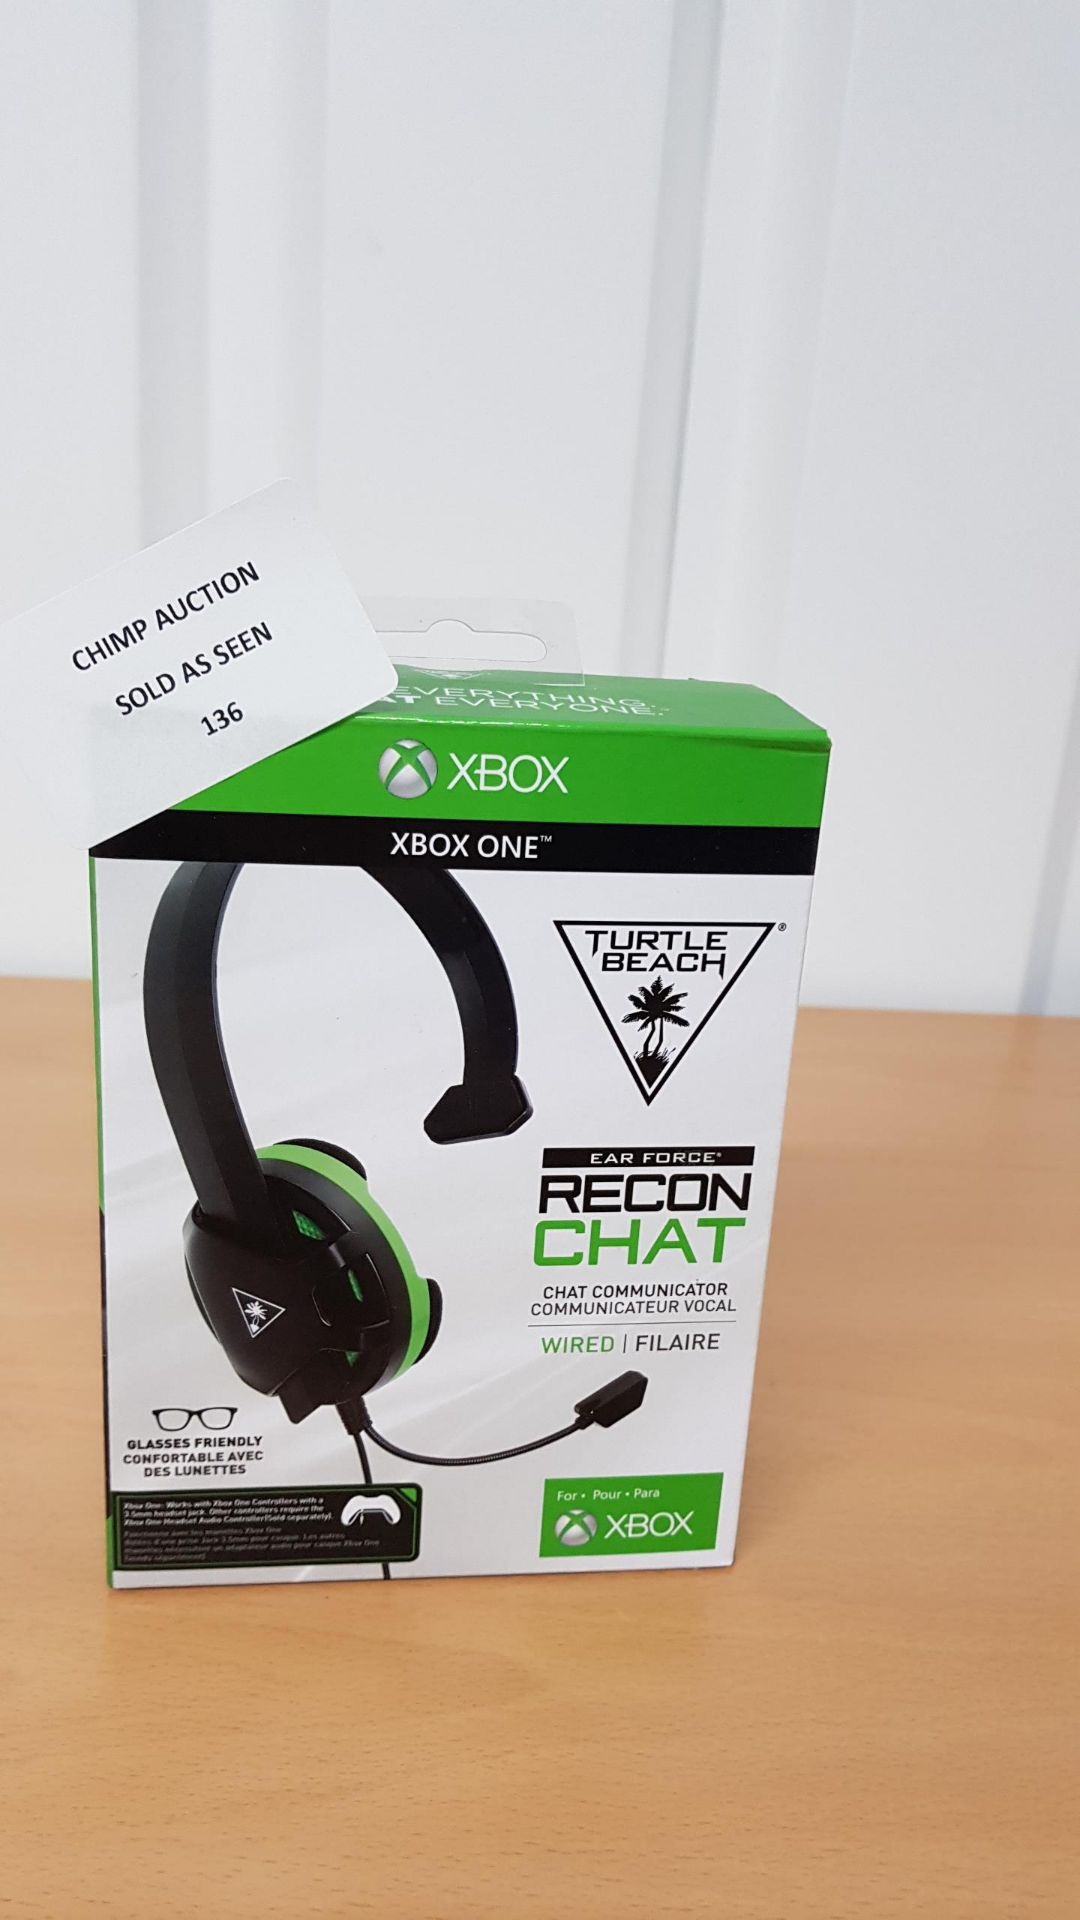 Turtle Beach Ear Force Recon chat XBOX ONE gaming headset